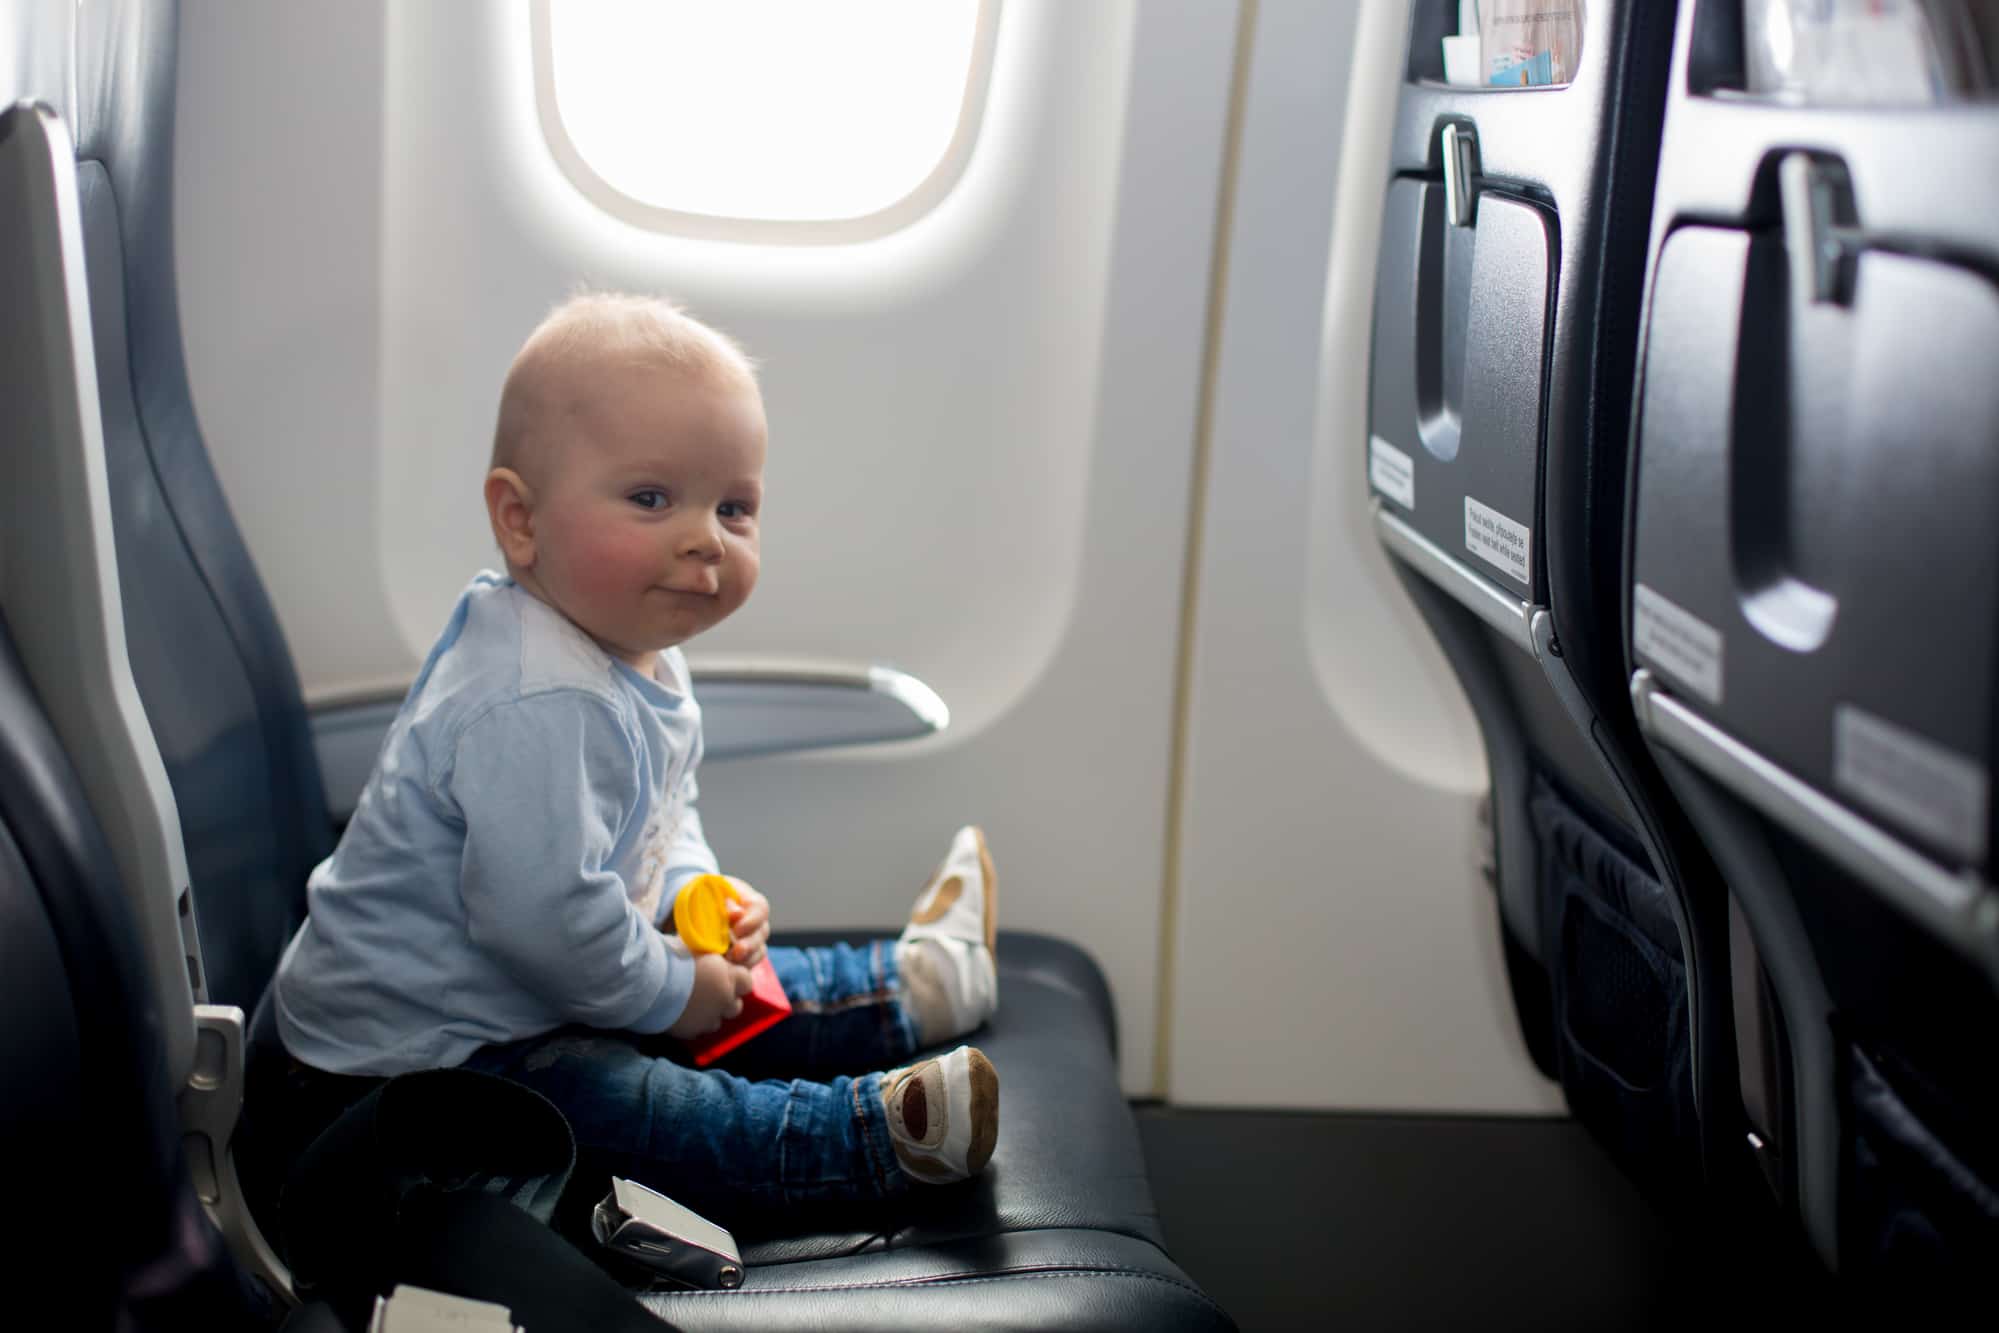 How To Fly With A Car Seat